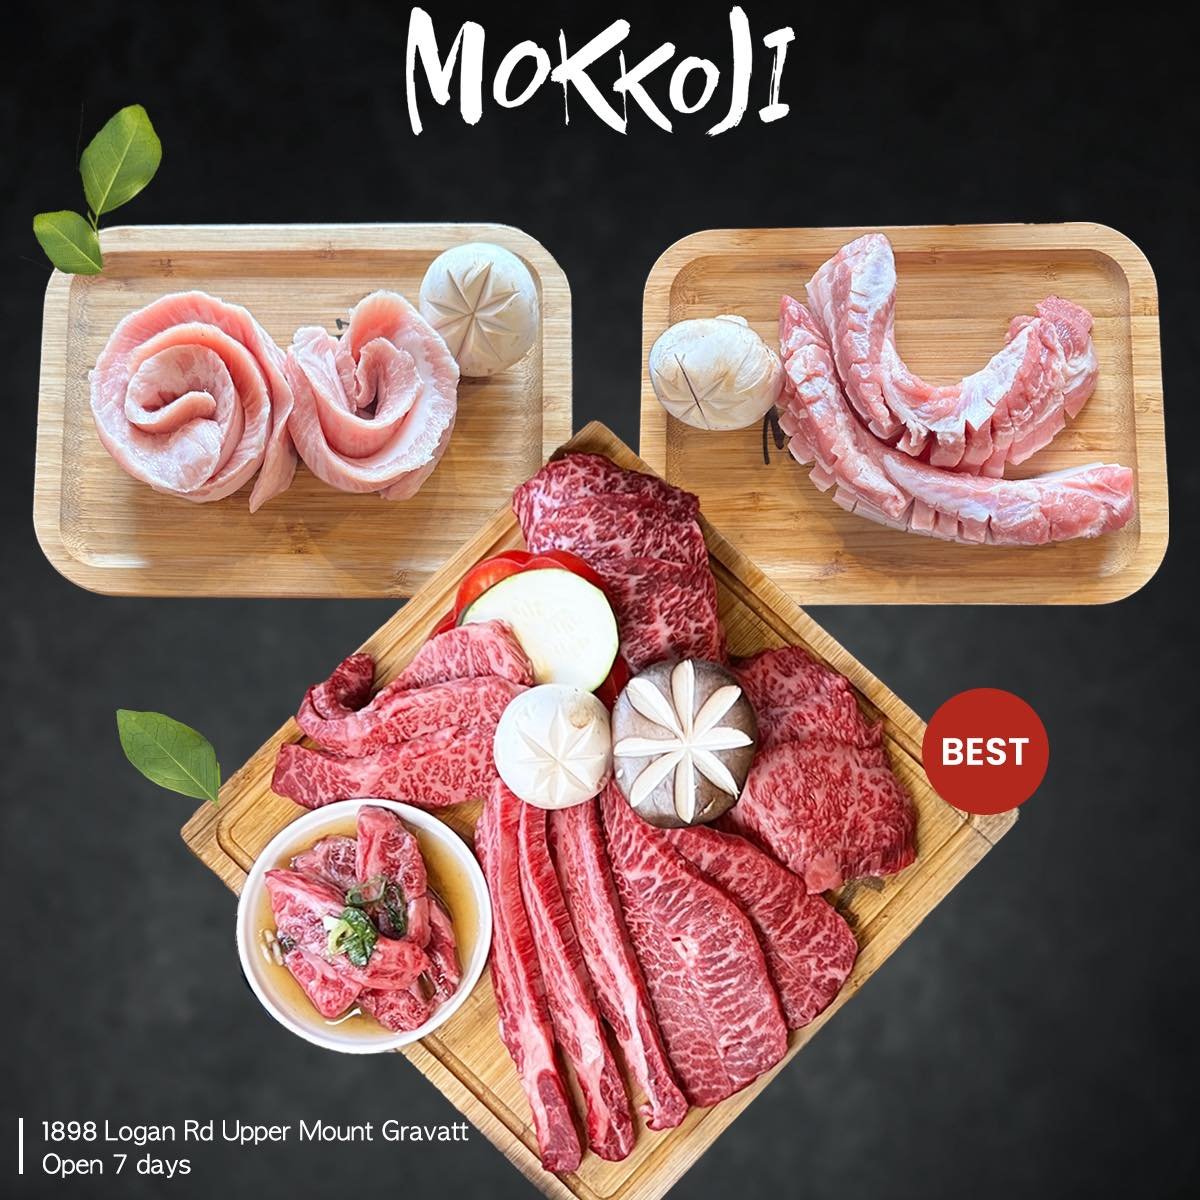 Bookings are essential on weekends to avoid disappointment. Make your booking now to indulge our juicy &amp; tender K-BBQ. 

🥩 Mokkoji Korean BBQ | Authentic Korean BBQ
⏰ Mon-Fri 4:30pm-12:00am
 Sat-Sun 11:30am-12:00am 
(break 2:30-4:30, last Order 